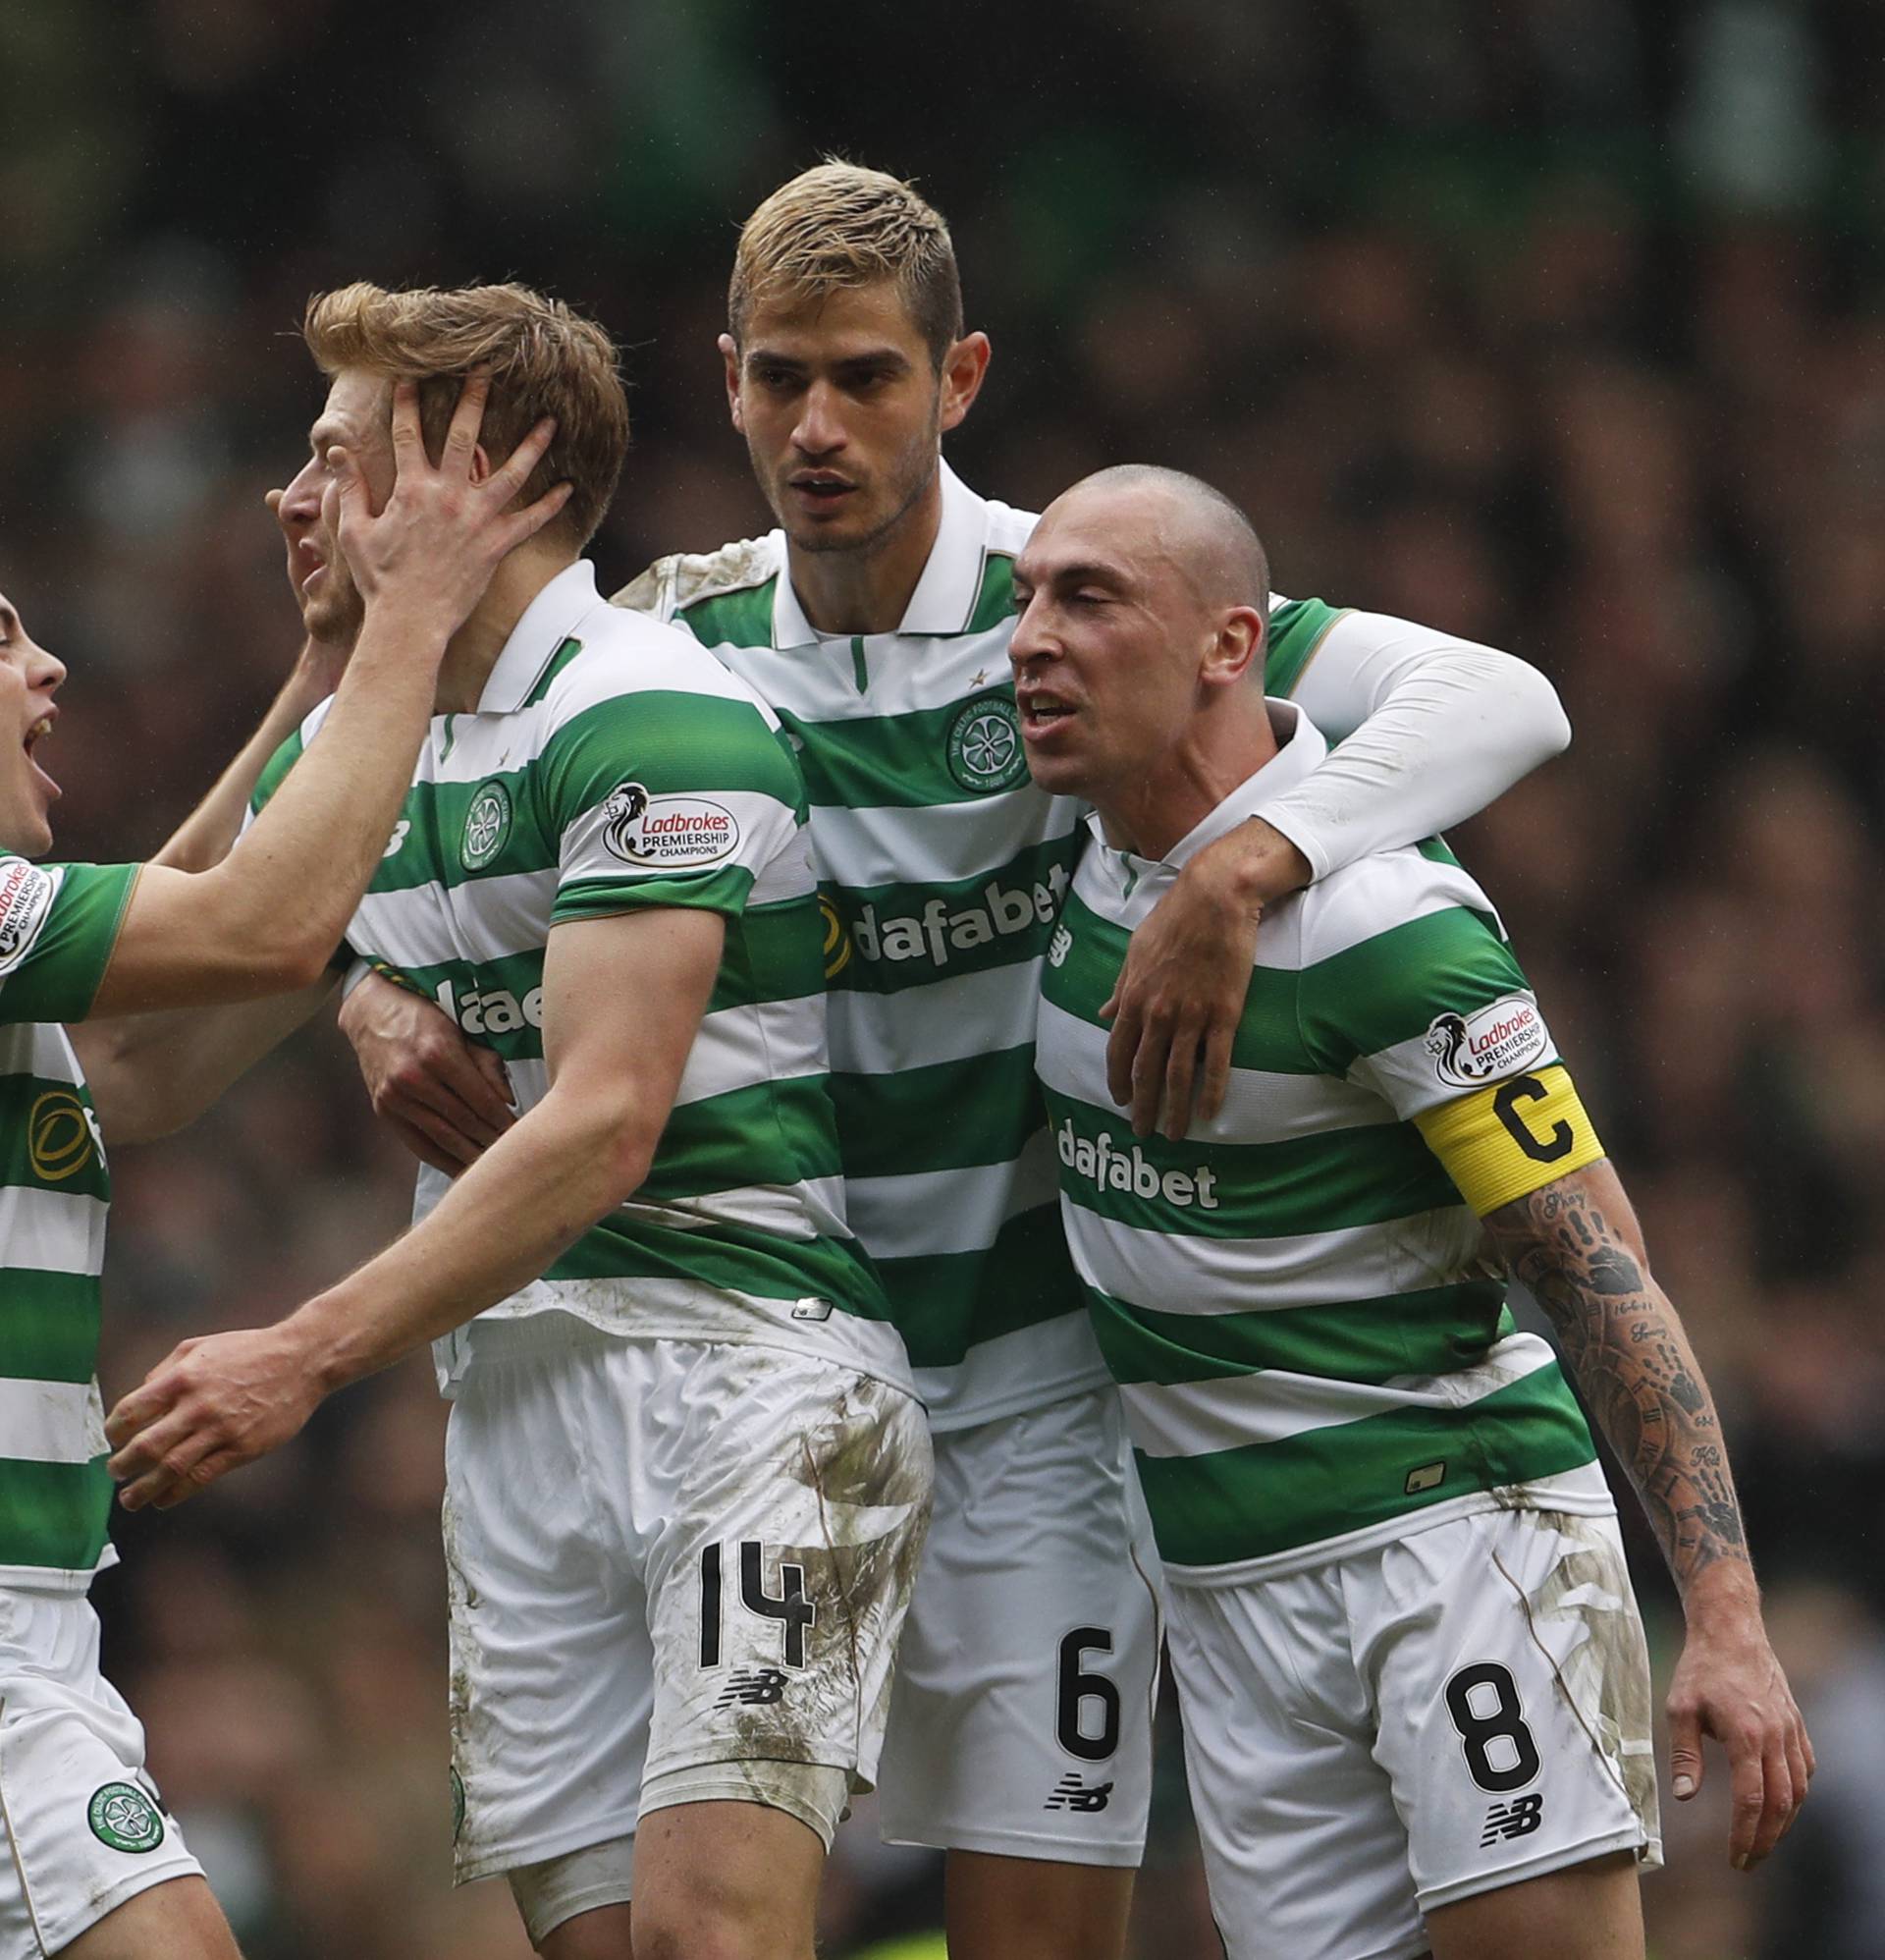 Celtic's Stuart Armstrong celebrates scoring their first goal with Scott Brown, James Forrest and Nir Bitton